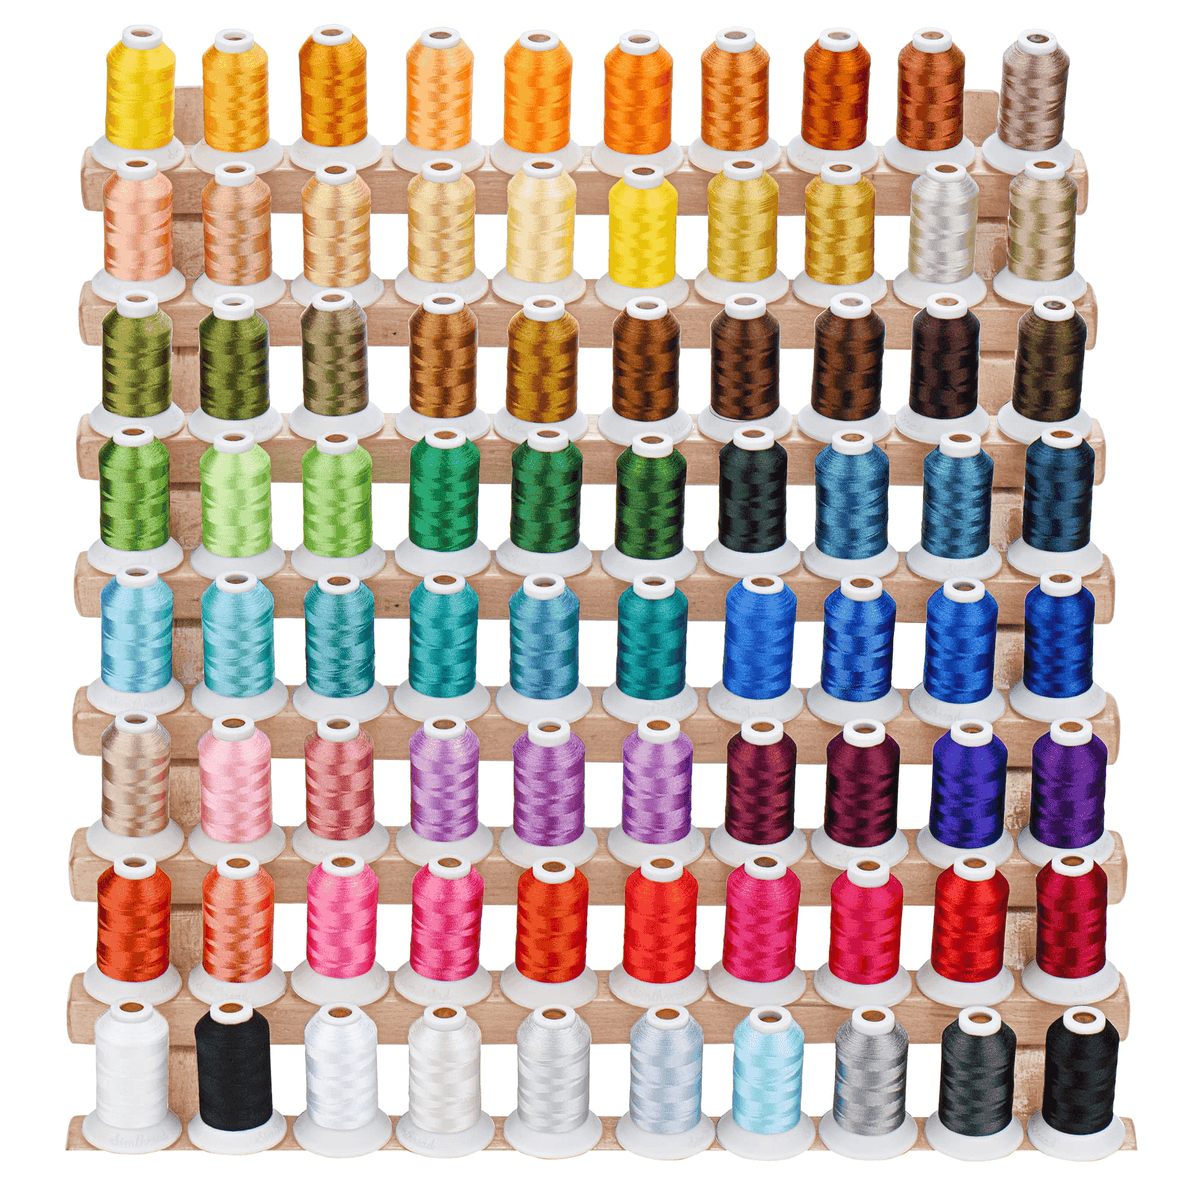 Simthread 10 Essential Colors Metallic Embroidery Machine Thread Kit For  Computerized Embroidery And Decorative Sewing 10c02 - Thread - AliExpress